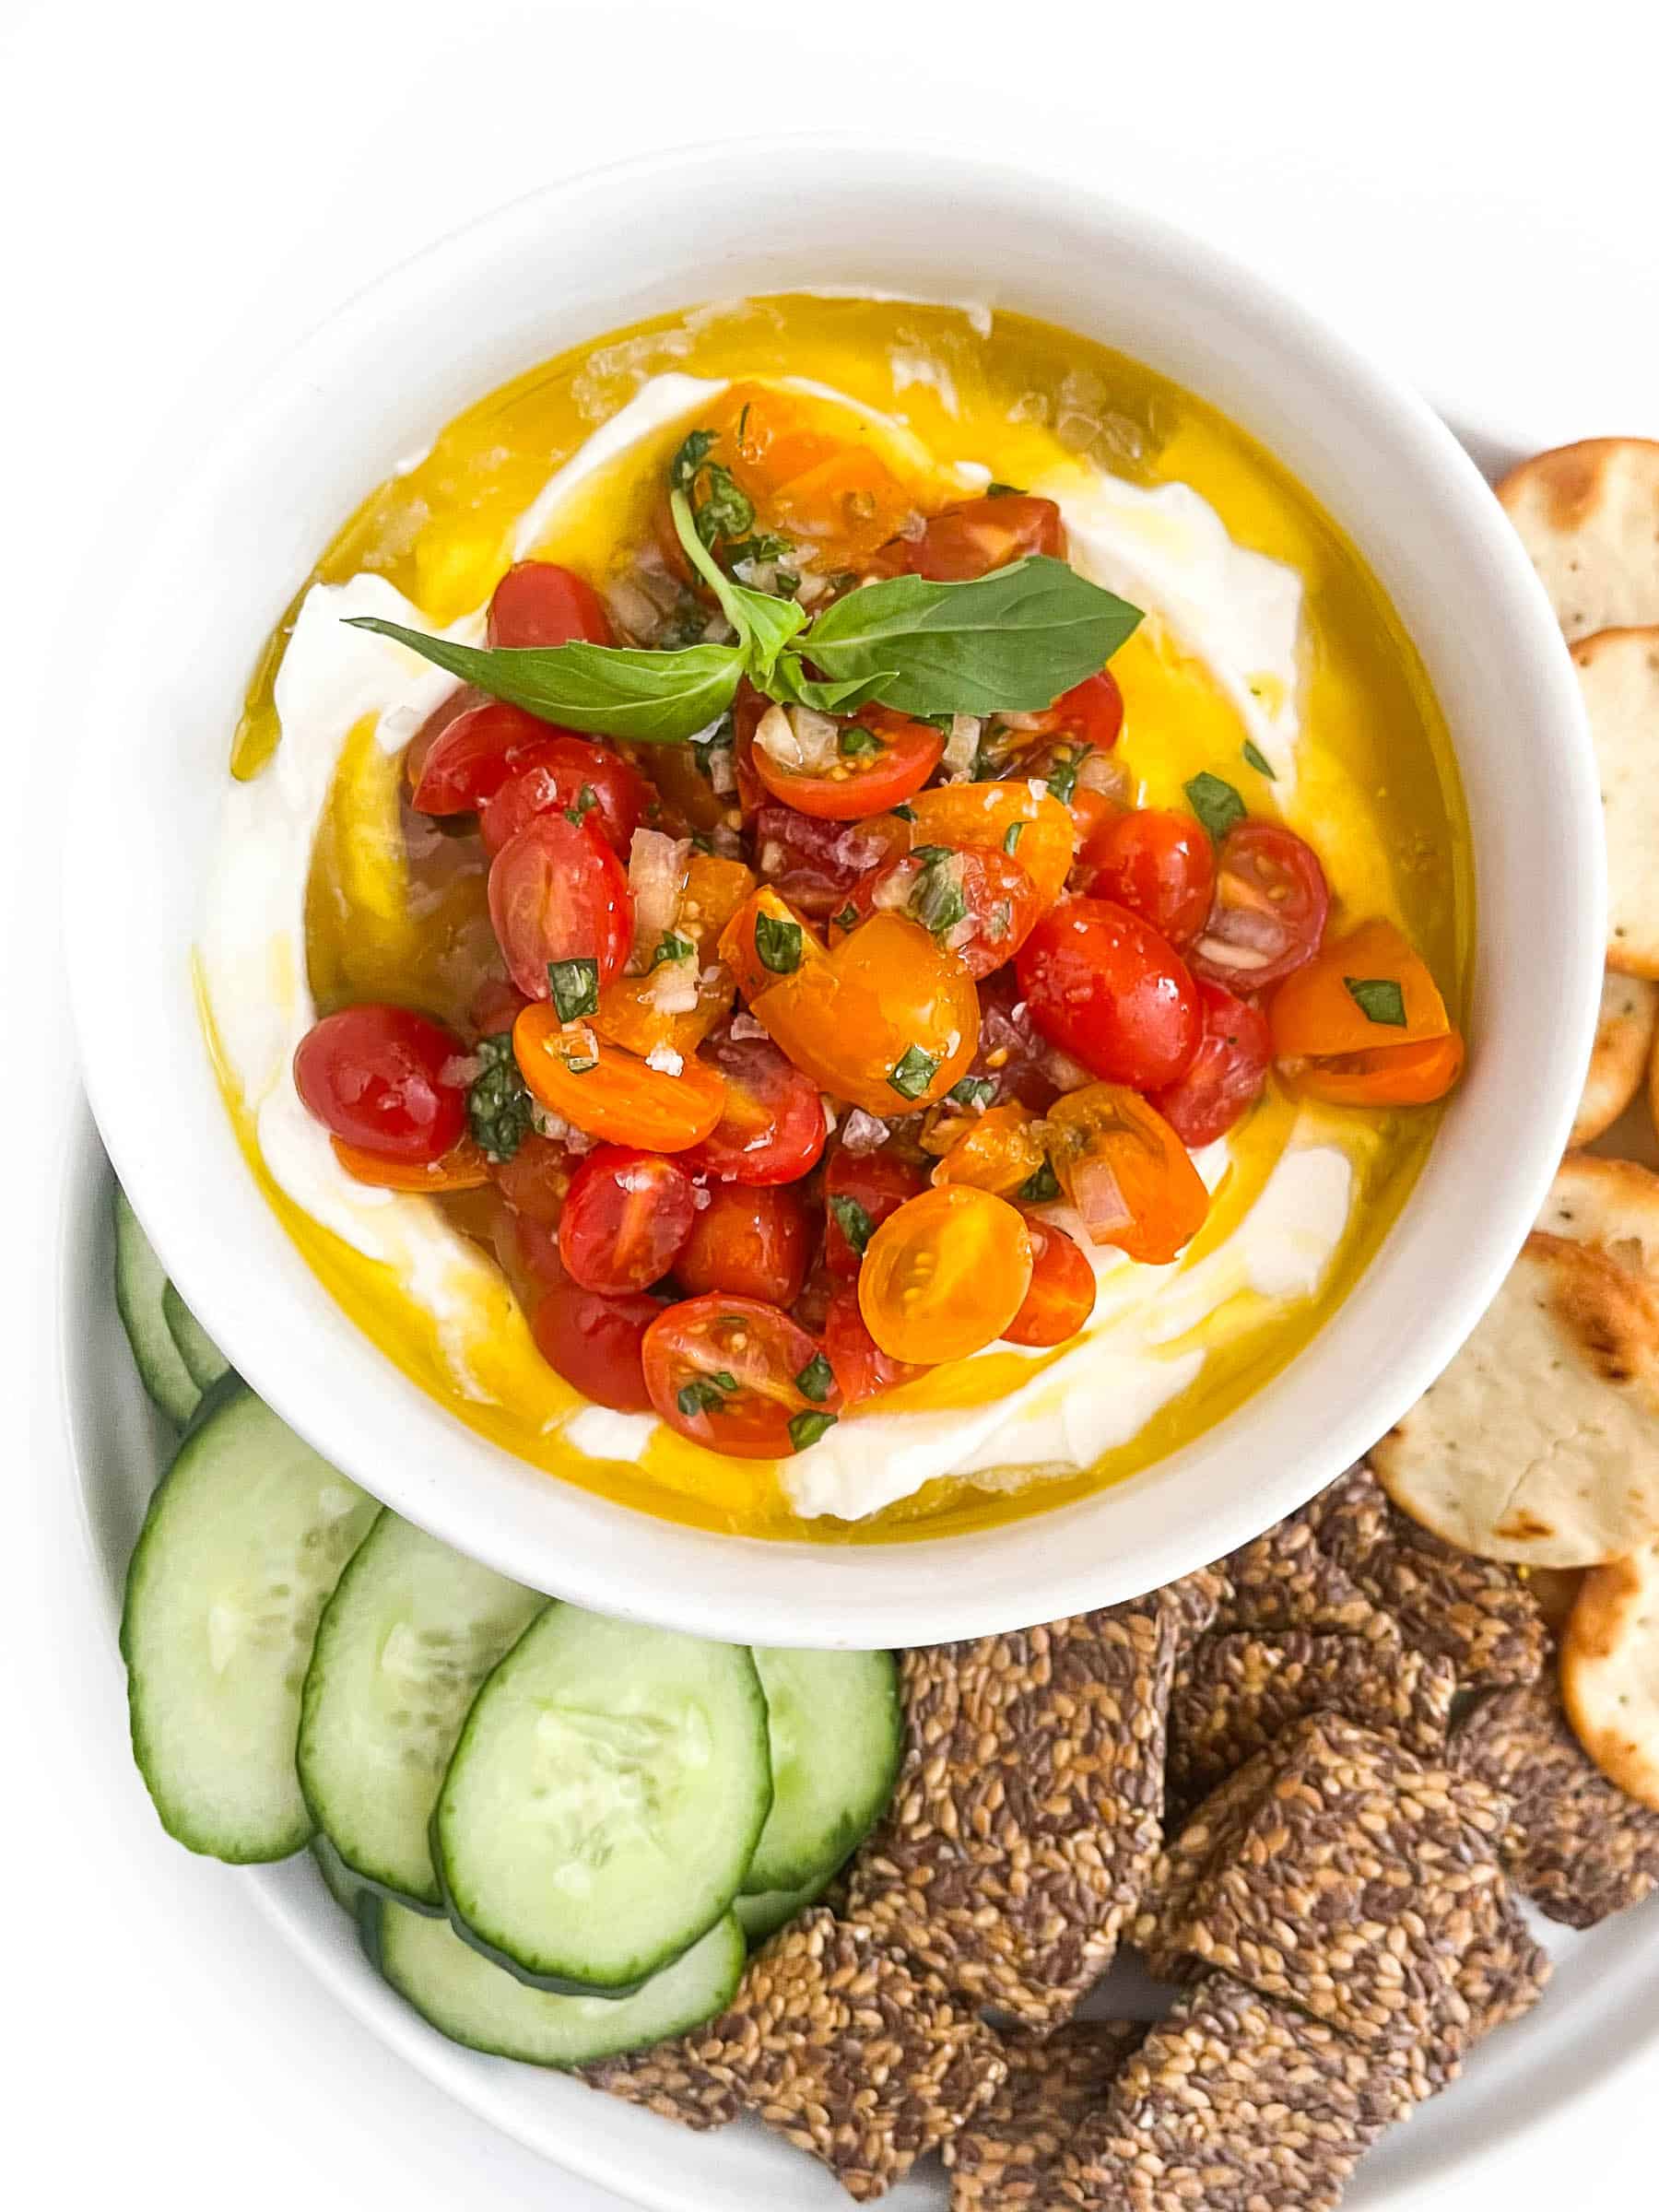 Whipped ricotta dip in a white bowl topped with grape tomatoes, basil and olive oil with cucumbers and crackers